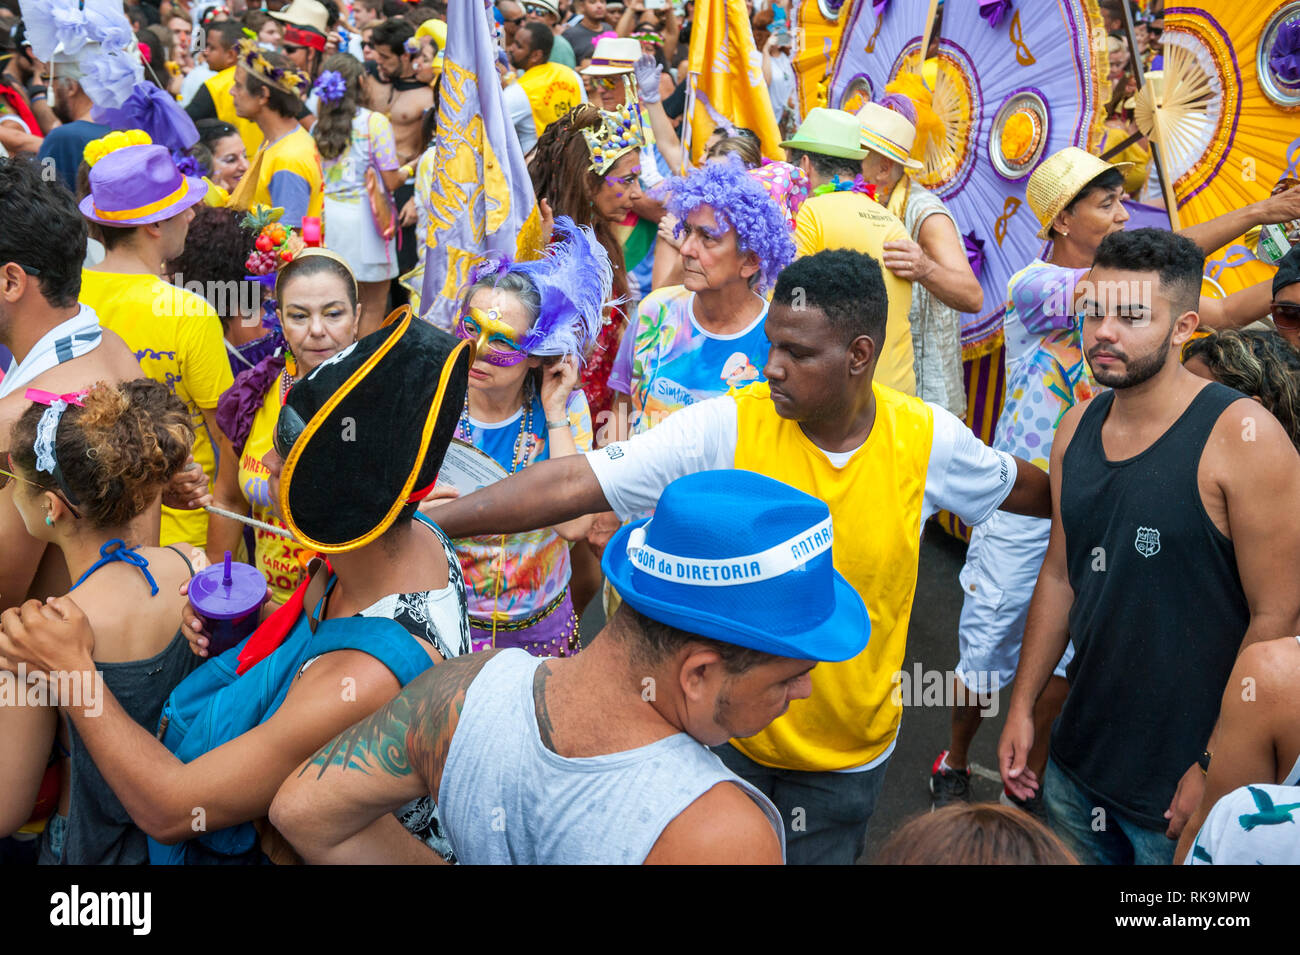 RIO DE JANEIRO - FEBRUARY 28, 2017: Brazilians of all ages jostle for space at Simpatia e Quase Amor (Sympathy is Almost Love) Carnival street party. Stock Photo